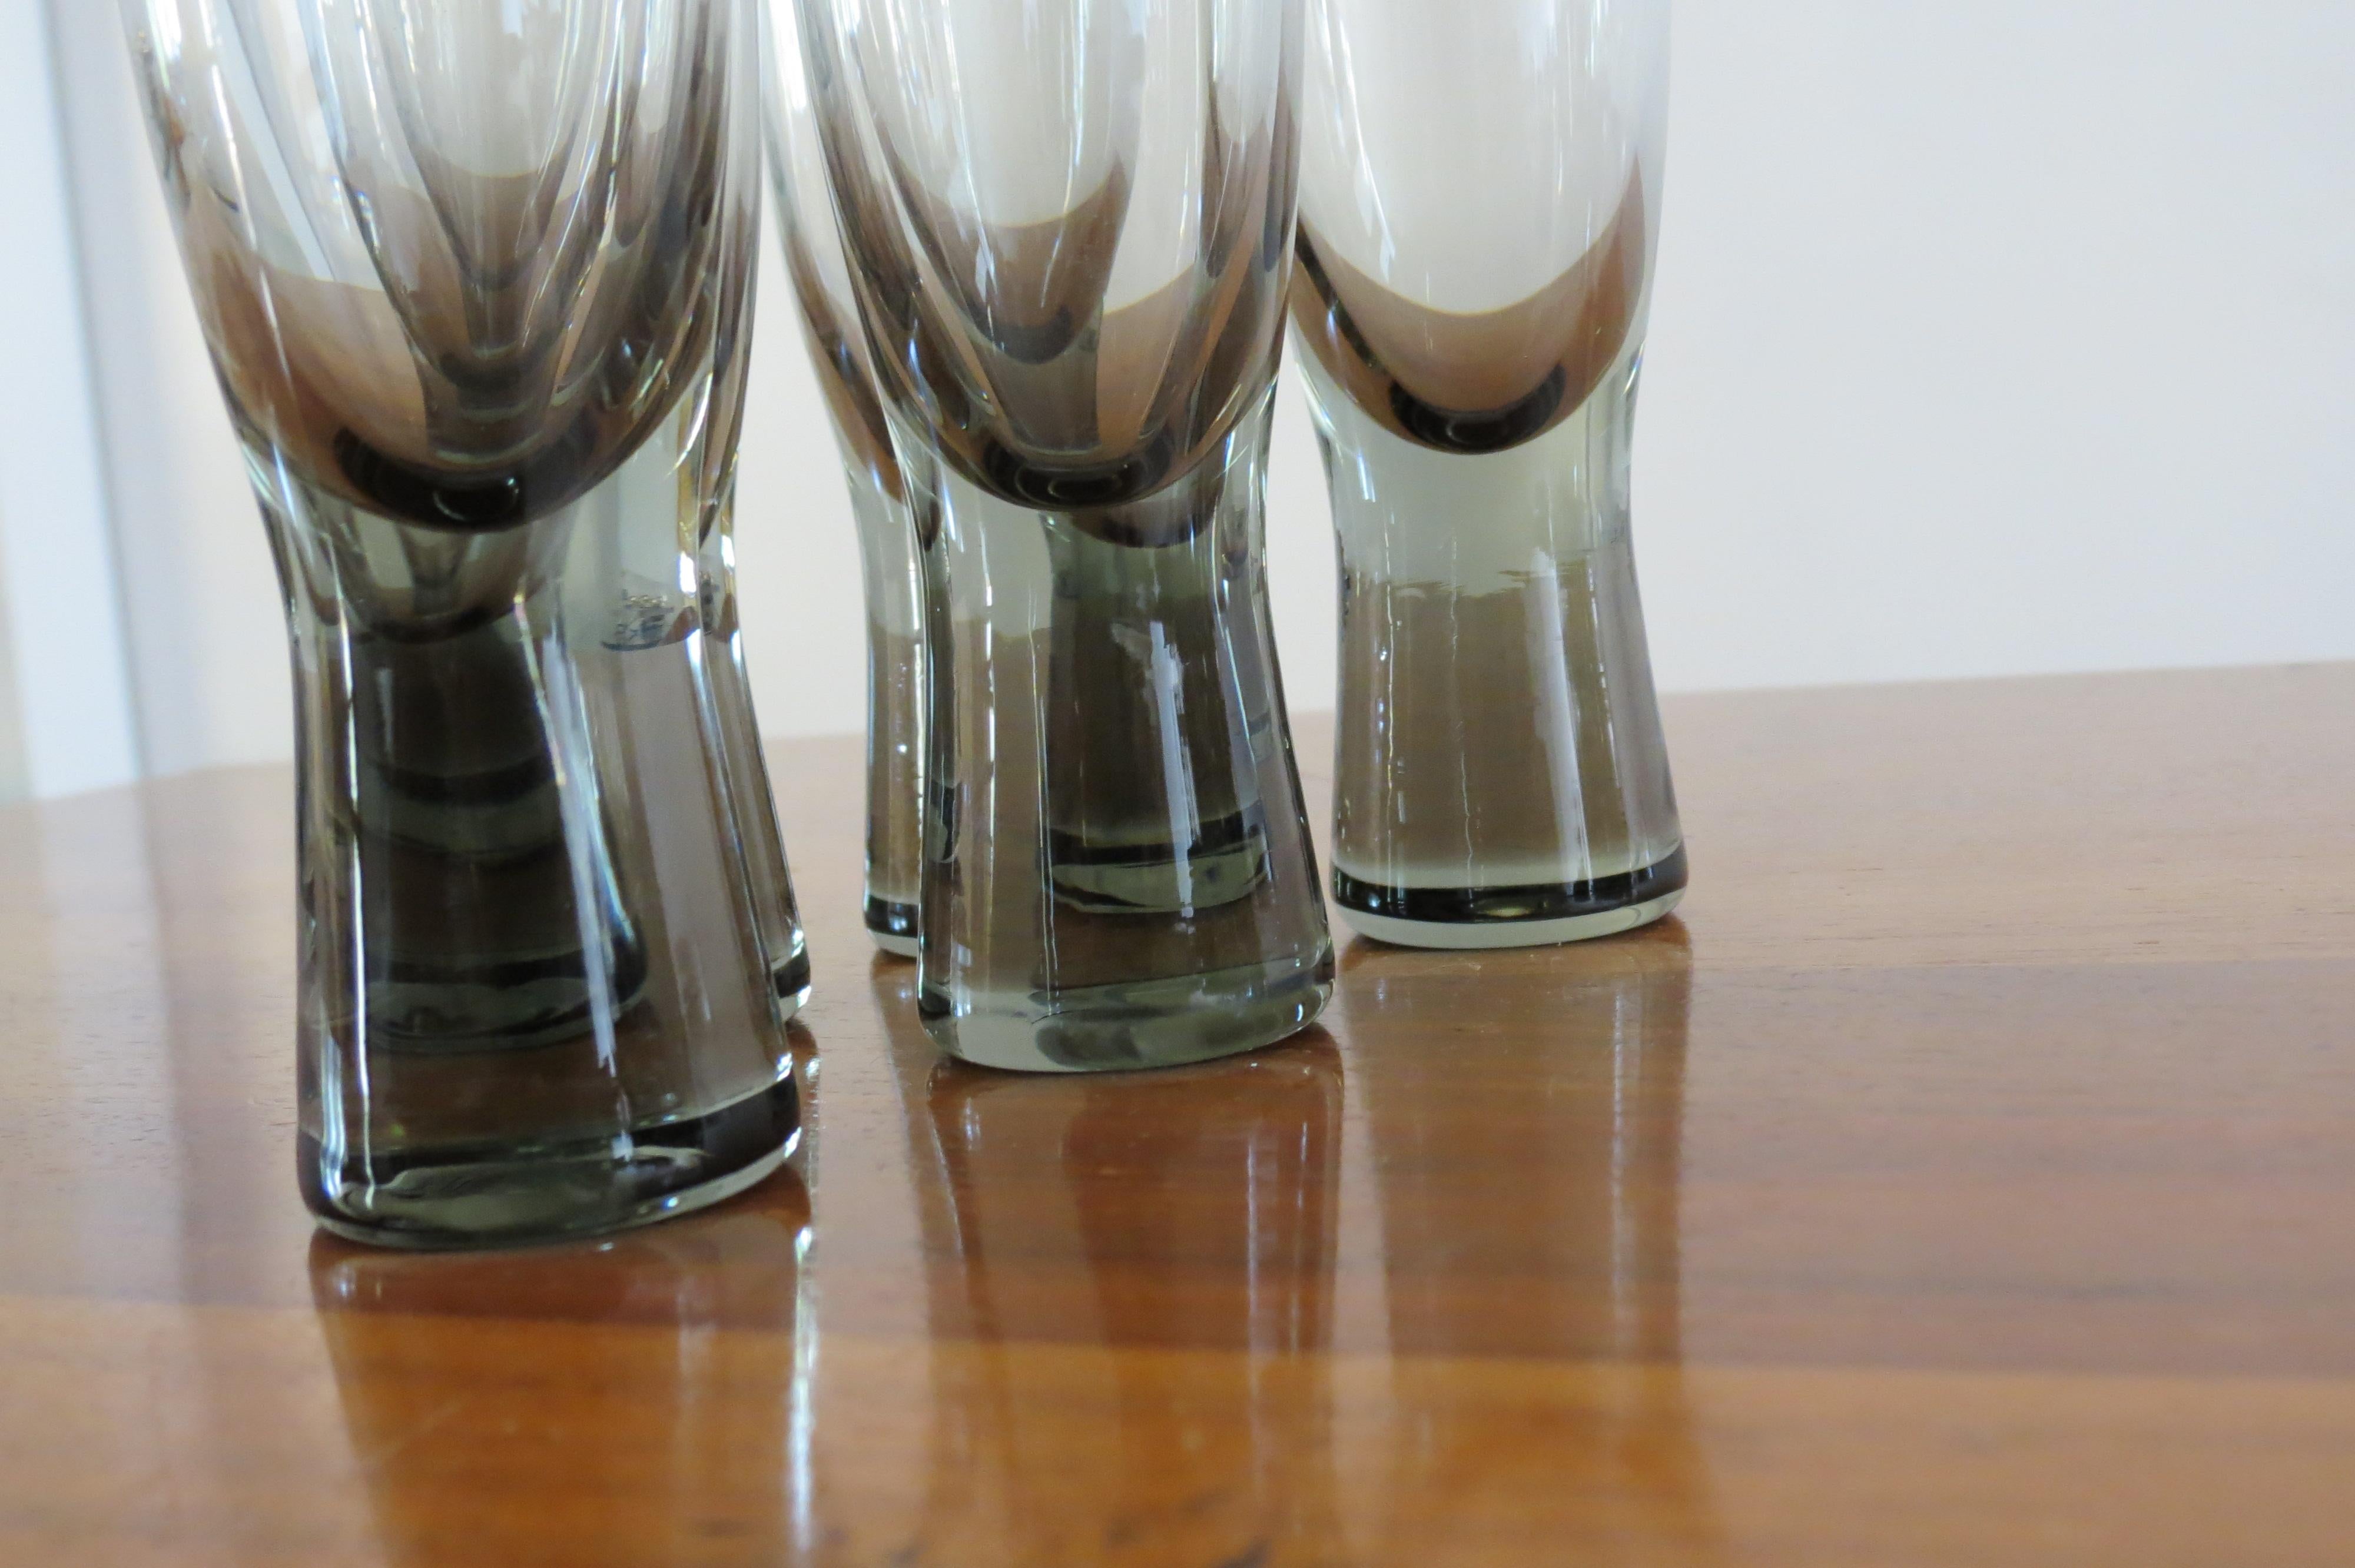 A set of six vintage Holmegaard glasses.
Designed by Per Lutken, model Canada, 1950s.
Two sets of six available.
Smoked glass
Good condition.
Measures: 11.5 cm tall, 4.2 cm diameter widest point
St926.

 